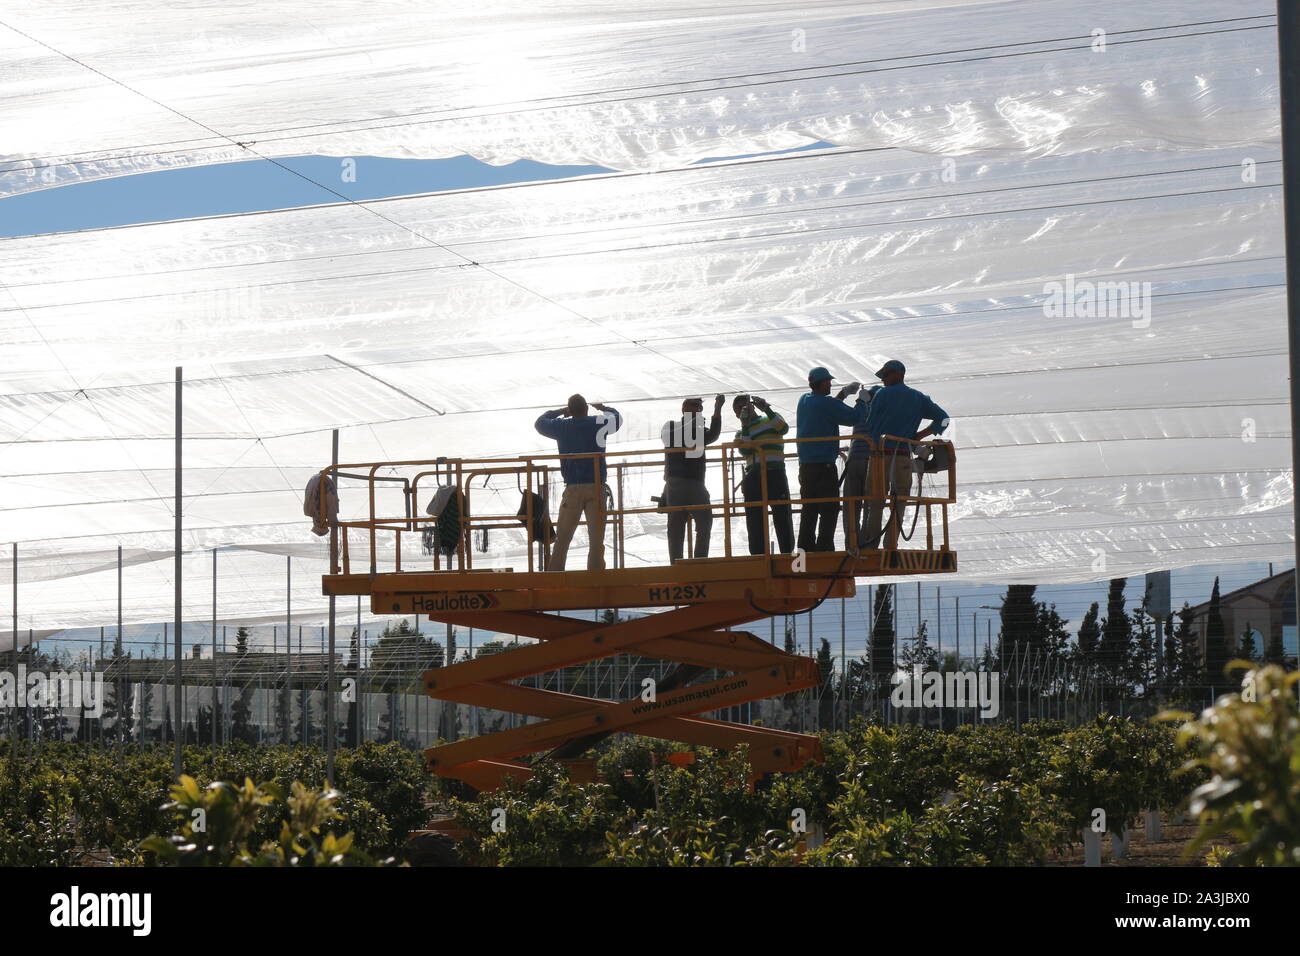 Alicante, Spain. Men working on the top of a scissor lift aerial work platform constructing a polyethylene greenhouse canopy for an orange plantation. Stock Photo